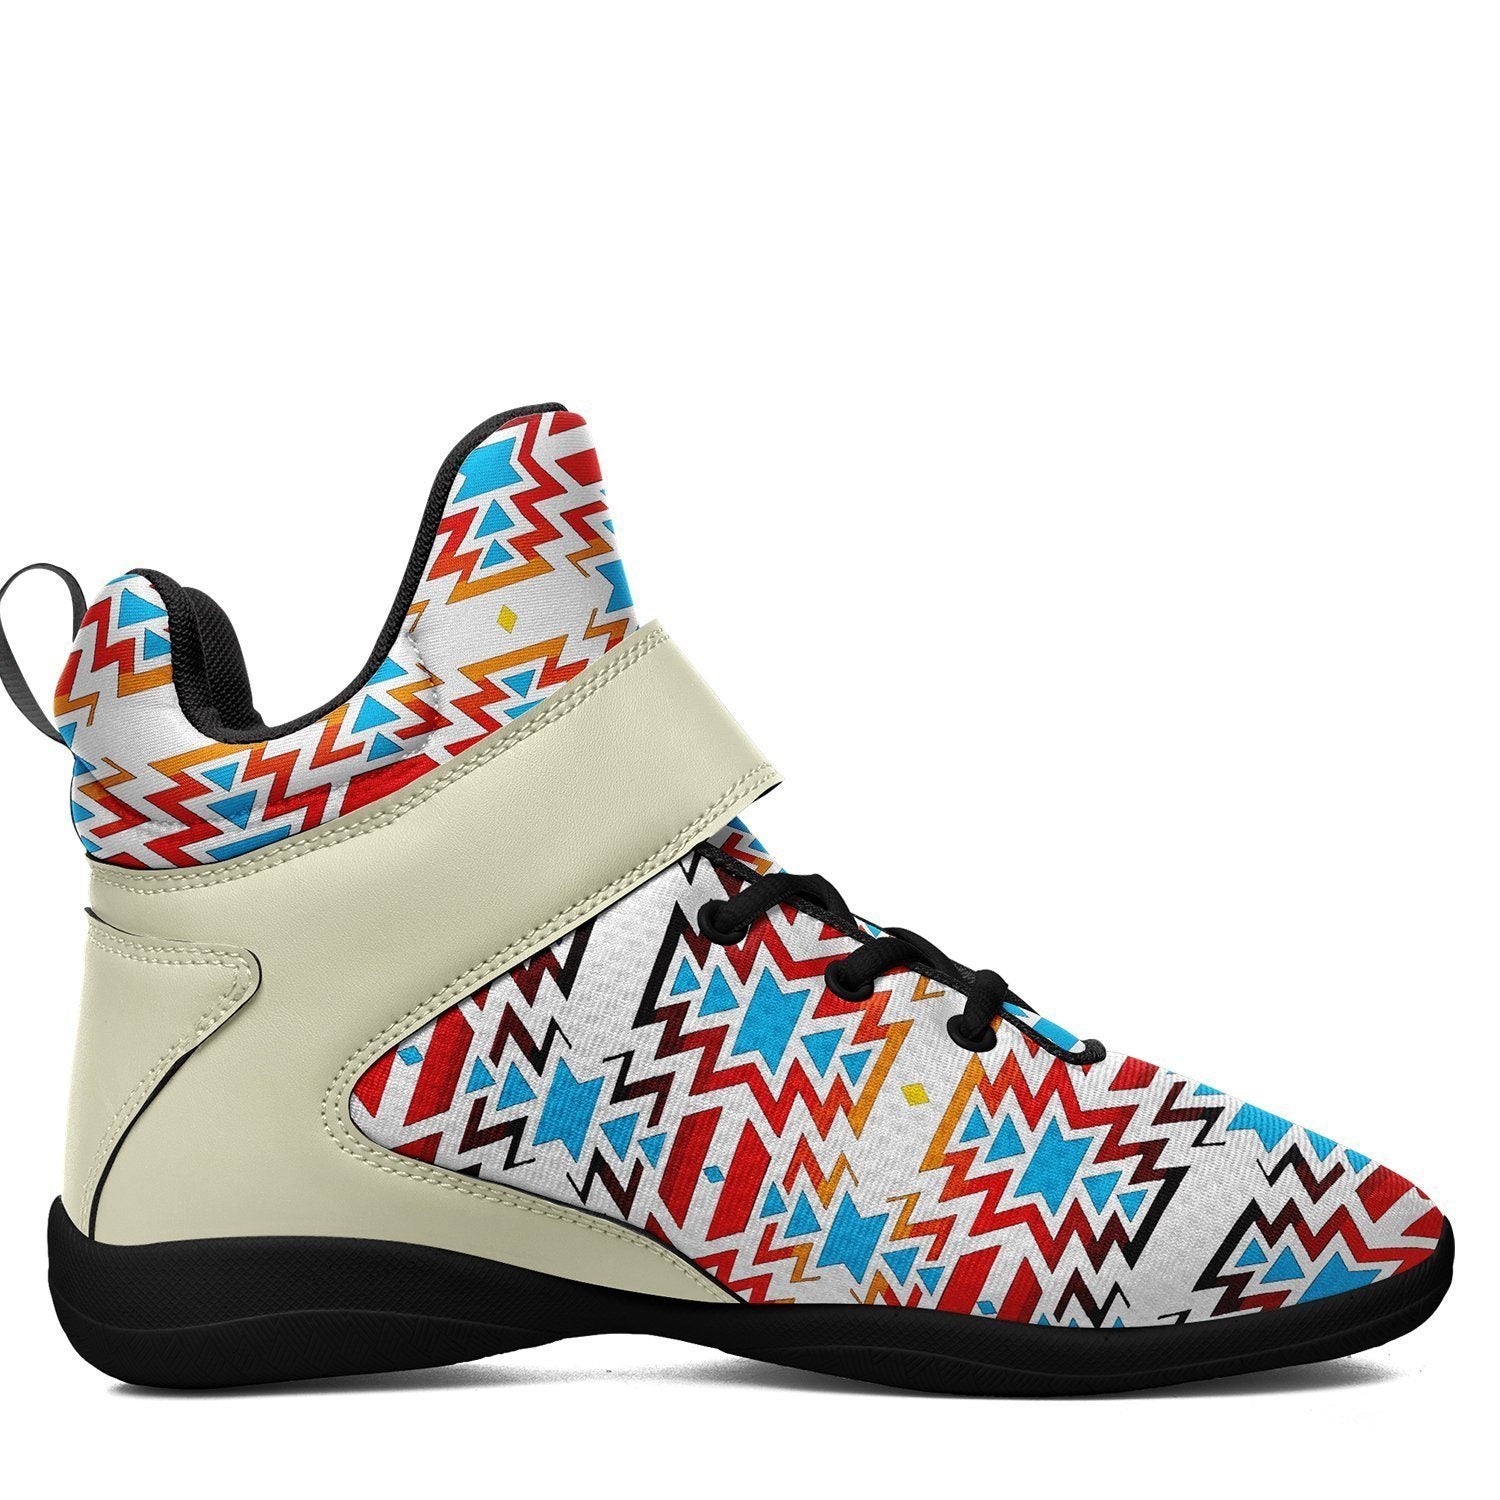 Fire Colors and Sky Ipottaa Basketball / Sport High Top Shoes - Black Sole 49 Dzine 